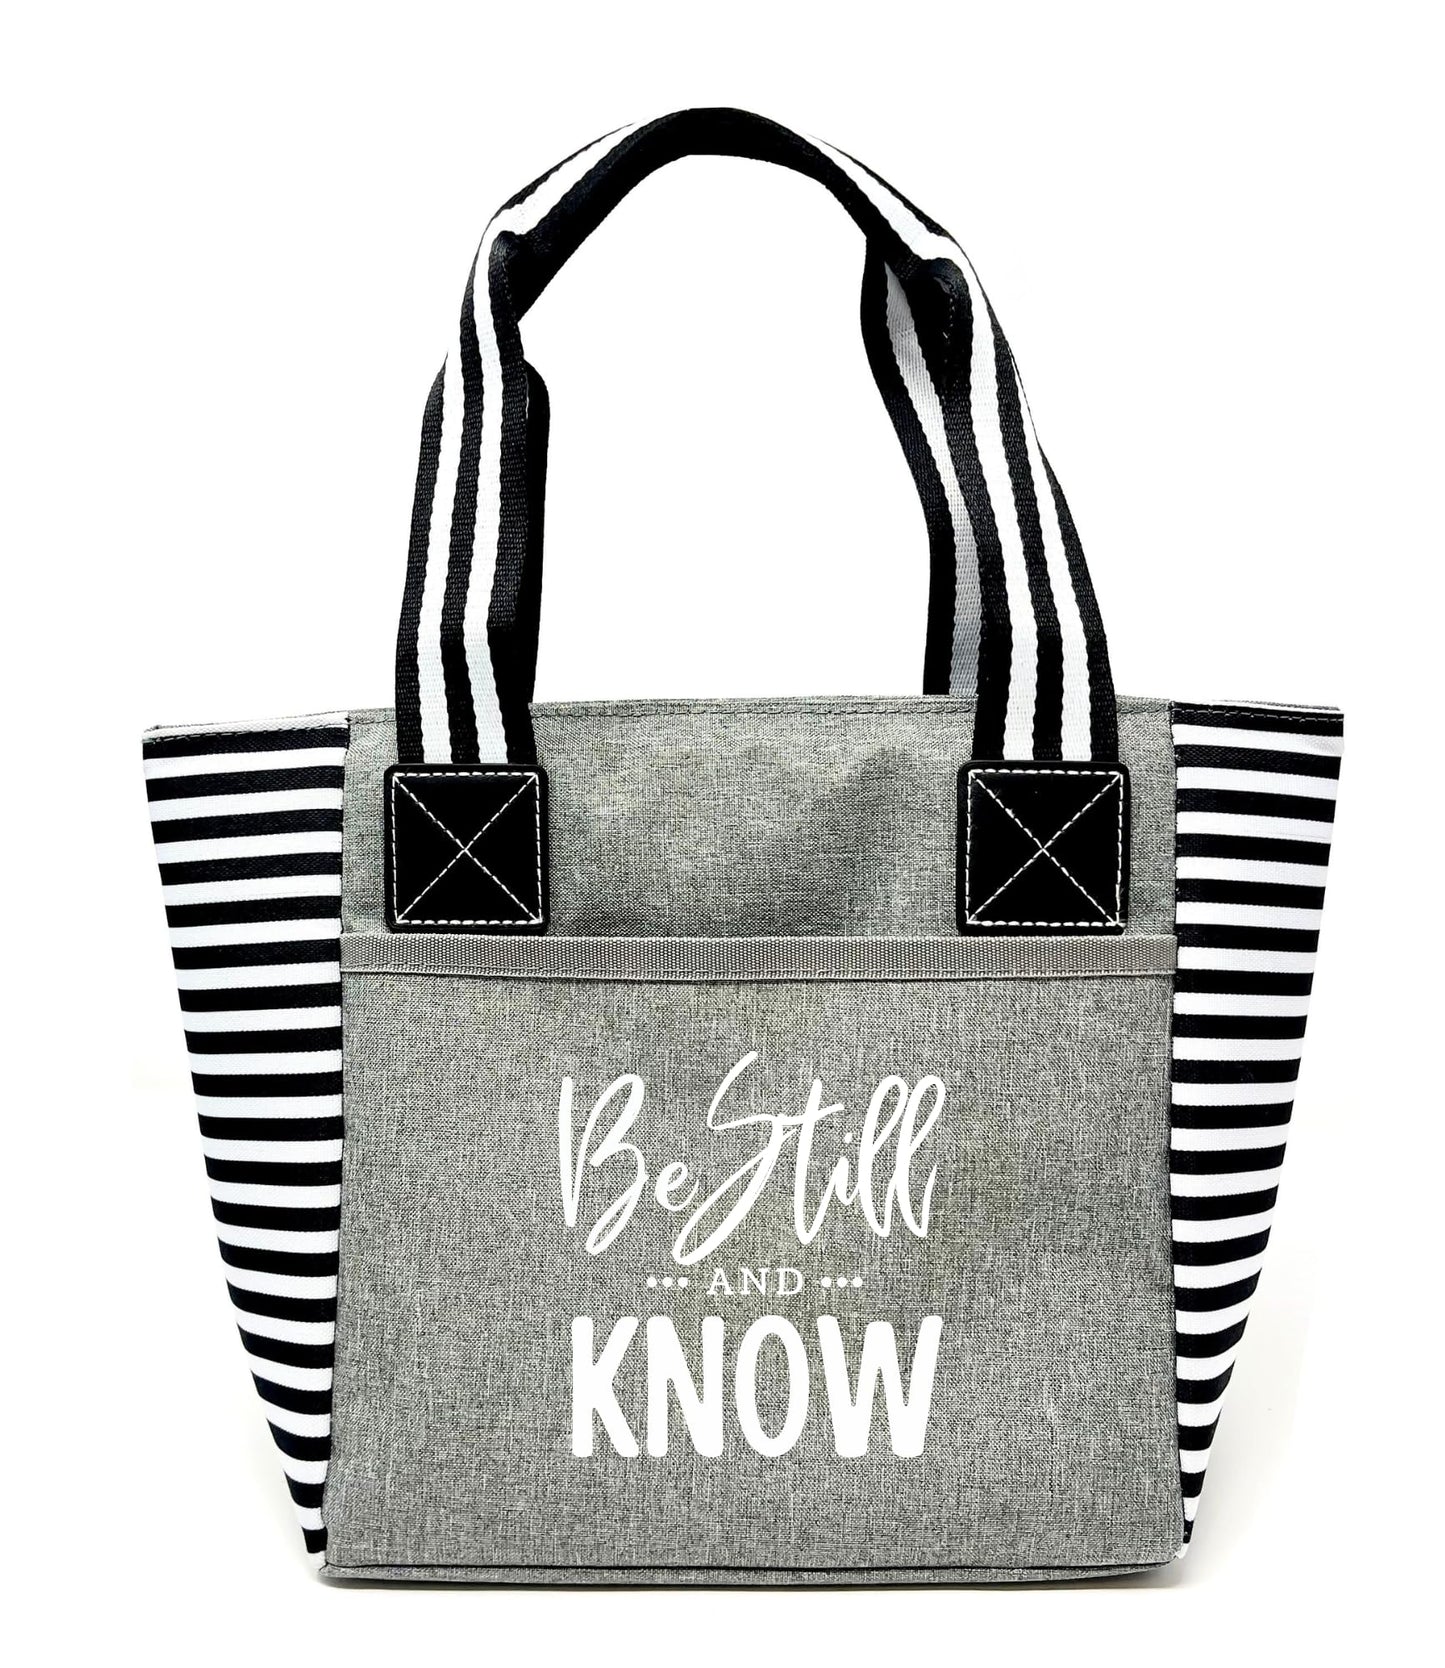 Cute Lunch Bags for Women - Be Still and Know Inspirational Motivational Insulated Lunch Tote for Work - Great gift idea for Nurse, Teacher, Grandma, Mom, Aunt